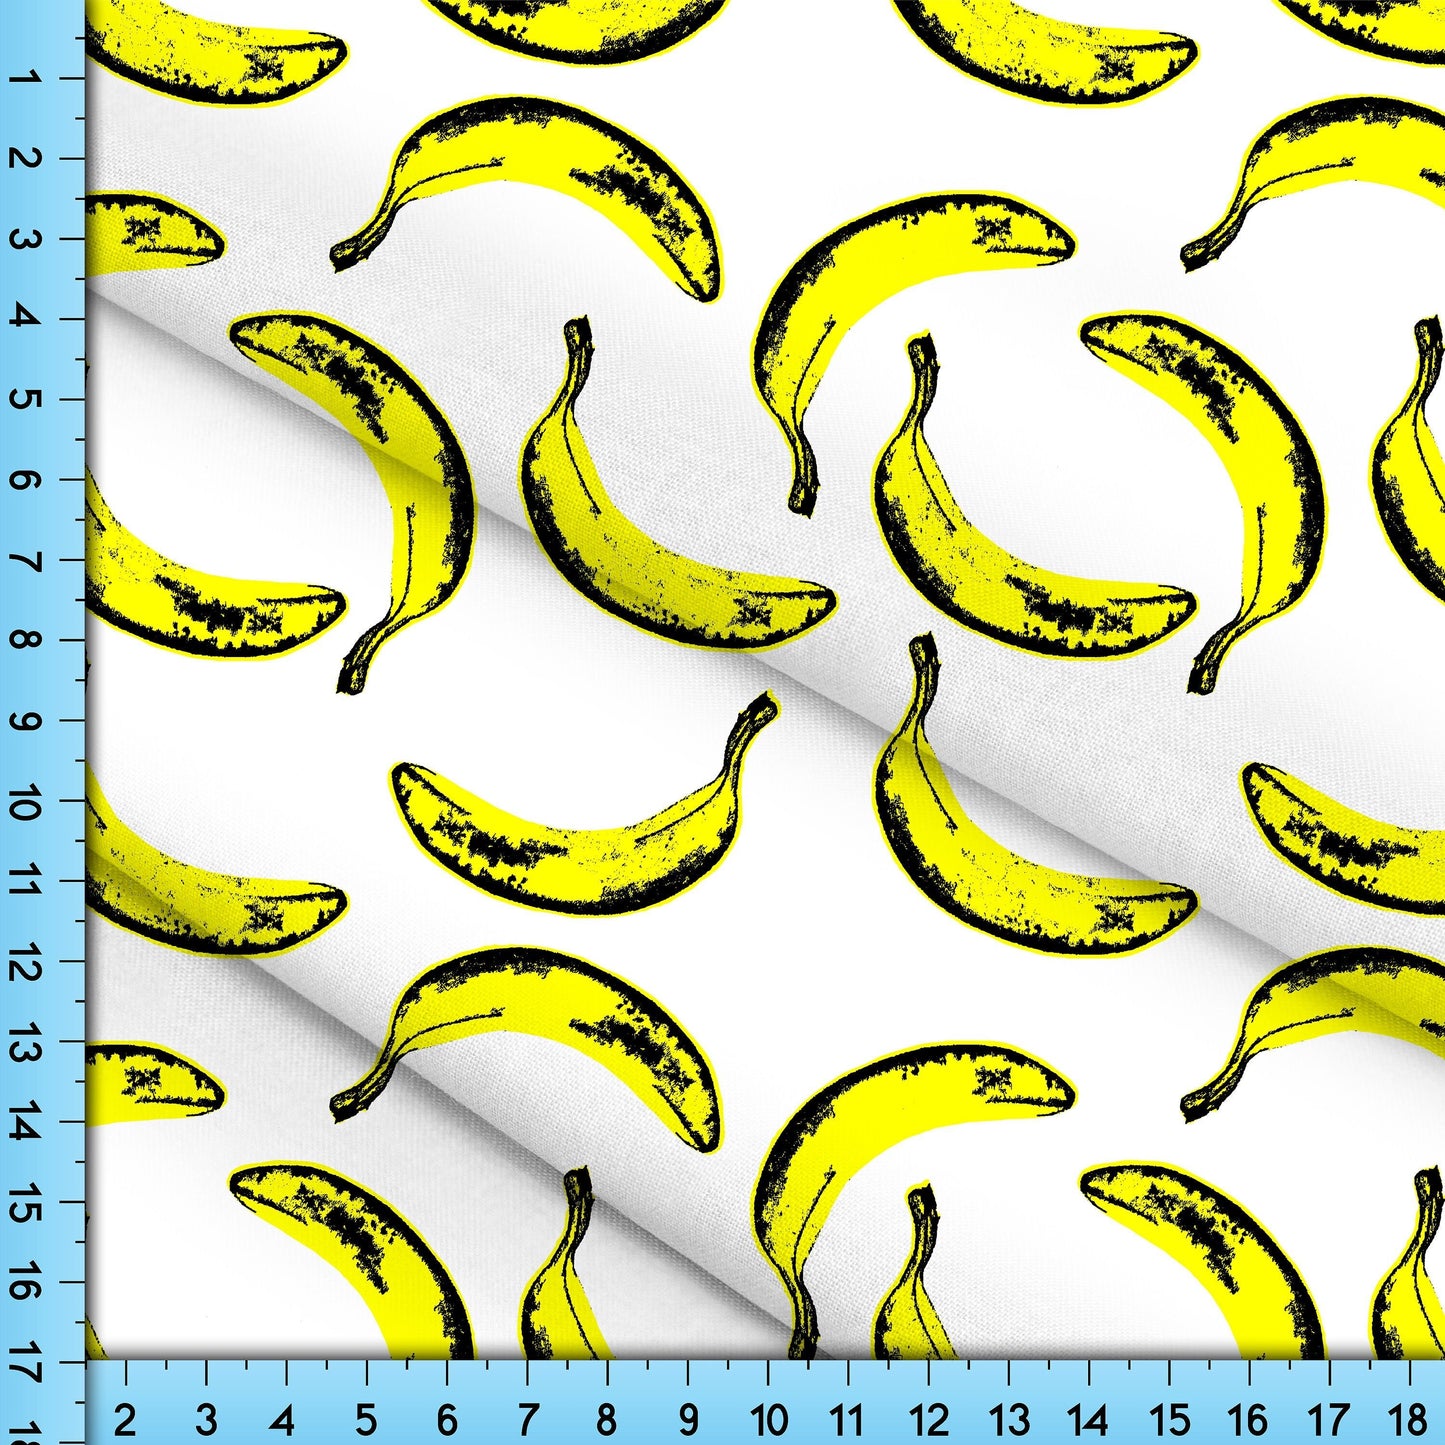 Yellow Banana Fabric Printed by the Yard, Pop Art Design for Crafts, Upholstery, Clothing, Tablecloths